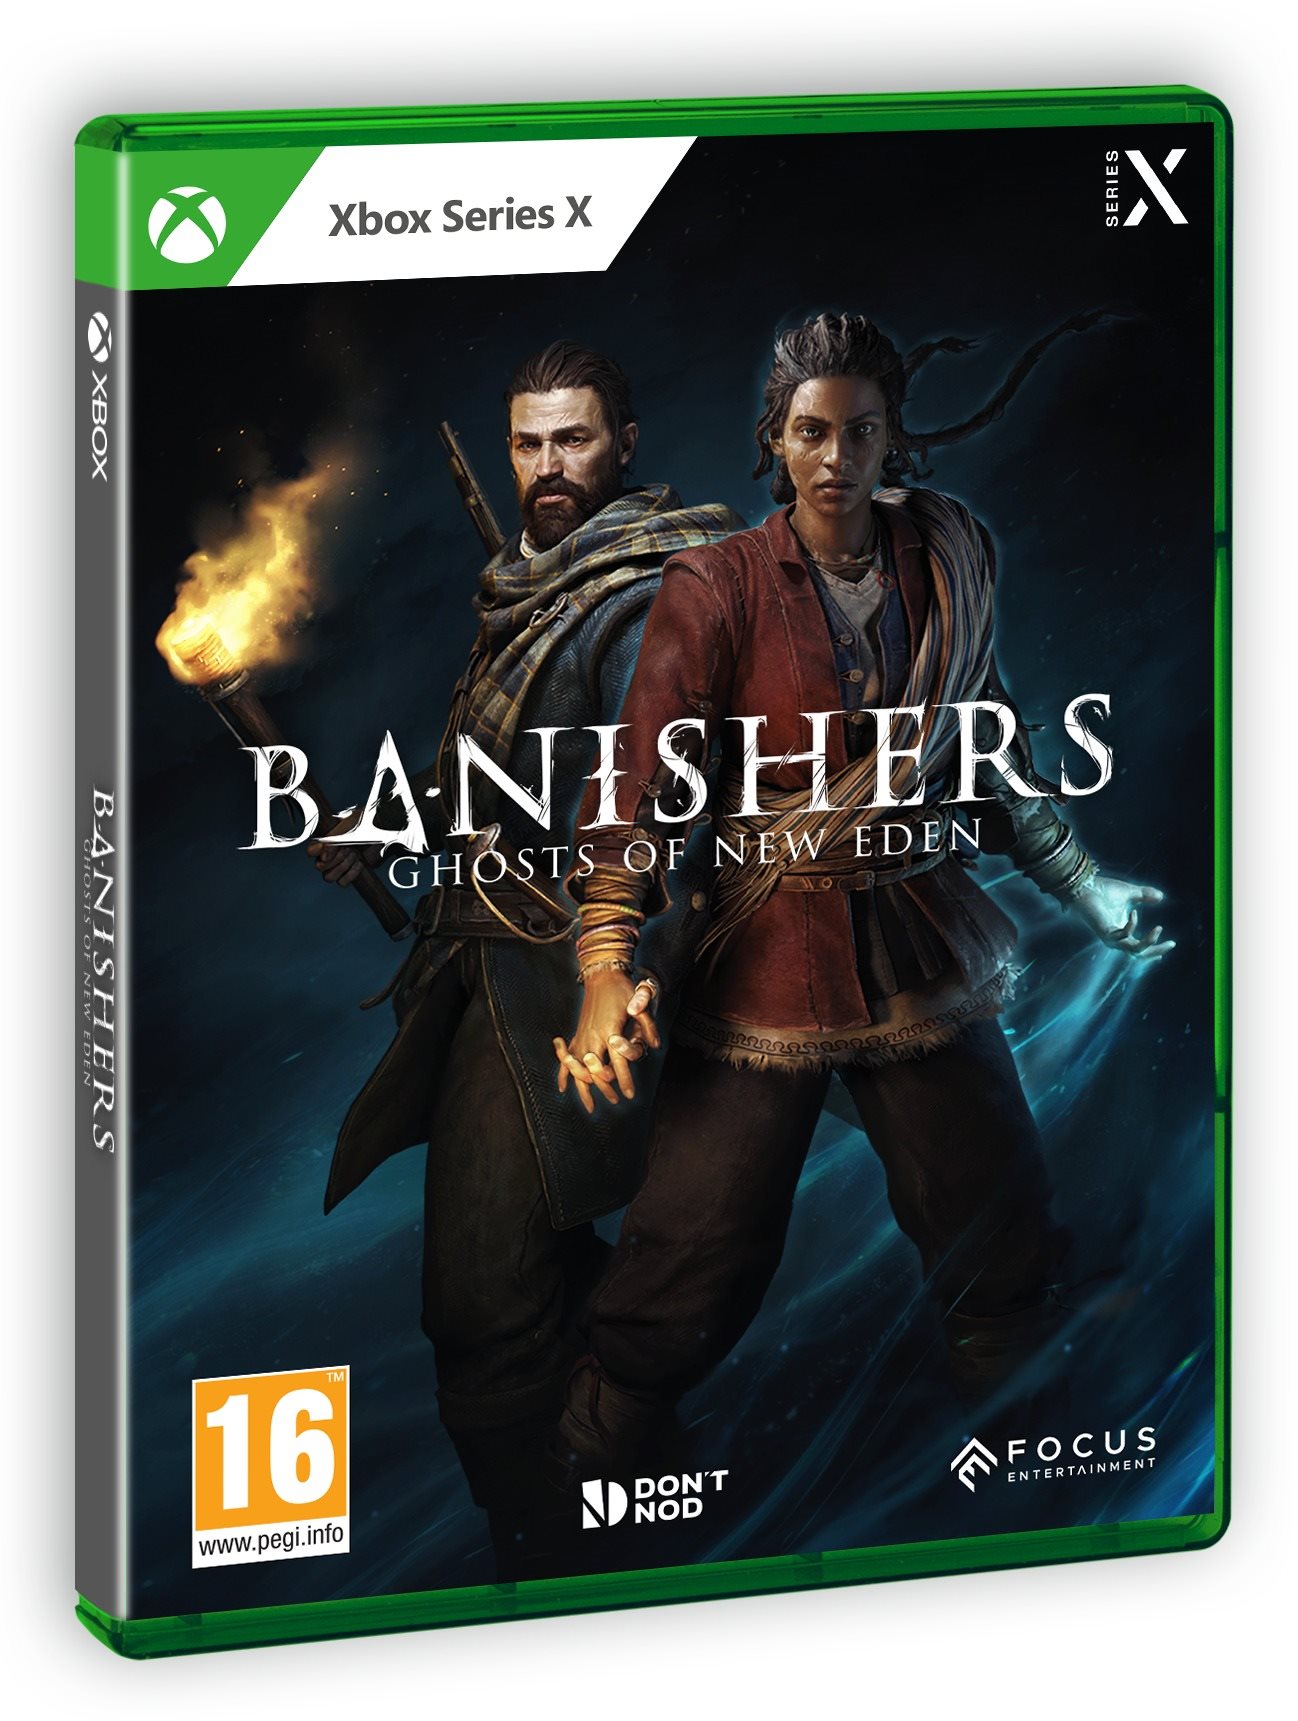 Banishers: Ghosts of New Eden - Xbox Series X